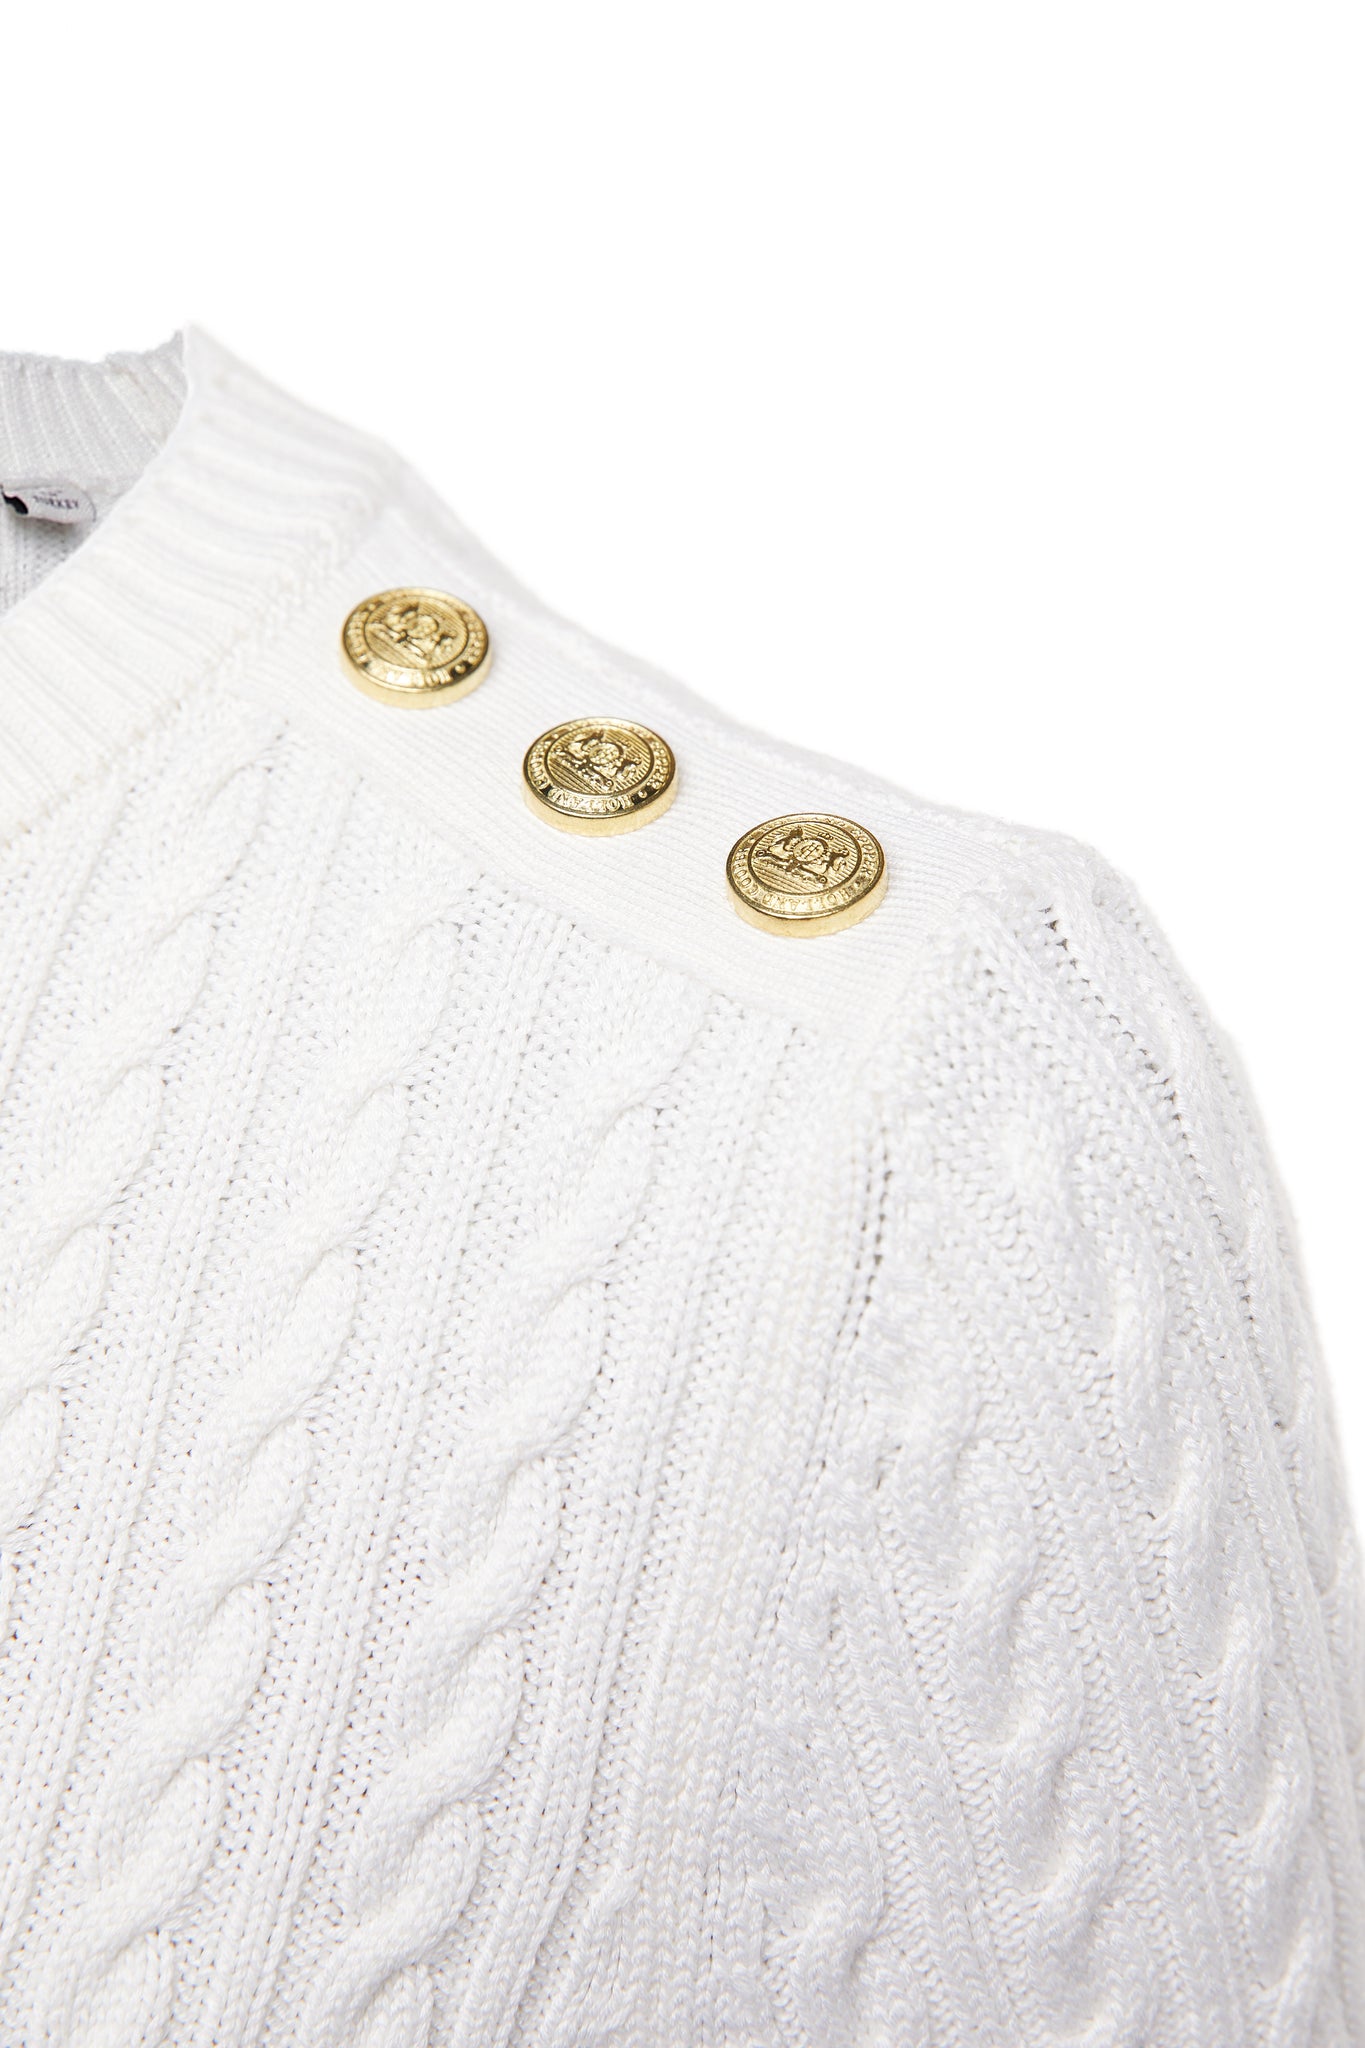 gold button detail on shoulders of womens cable knit jumper in white with ribbed crew neck cuffs and hem